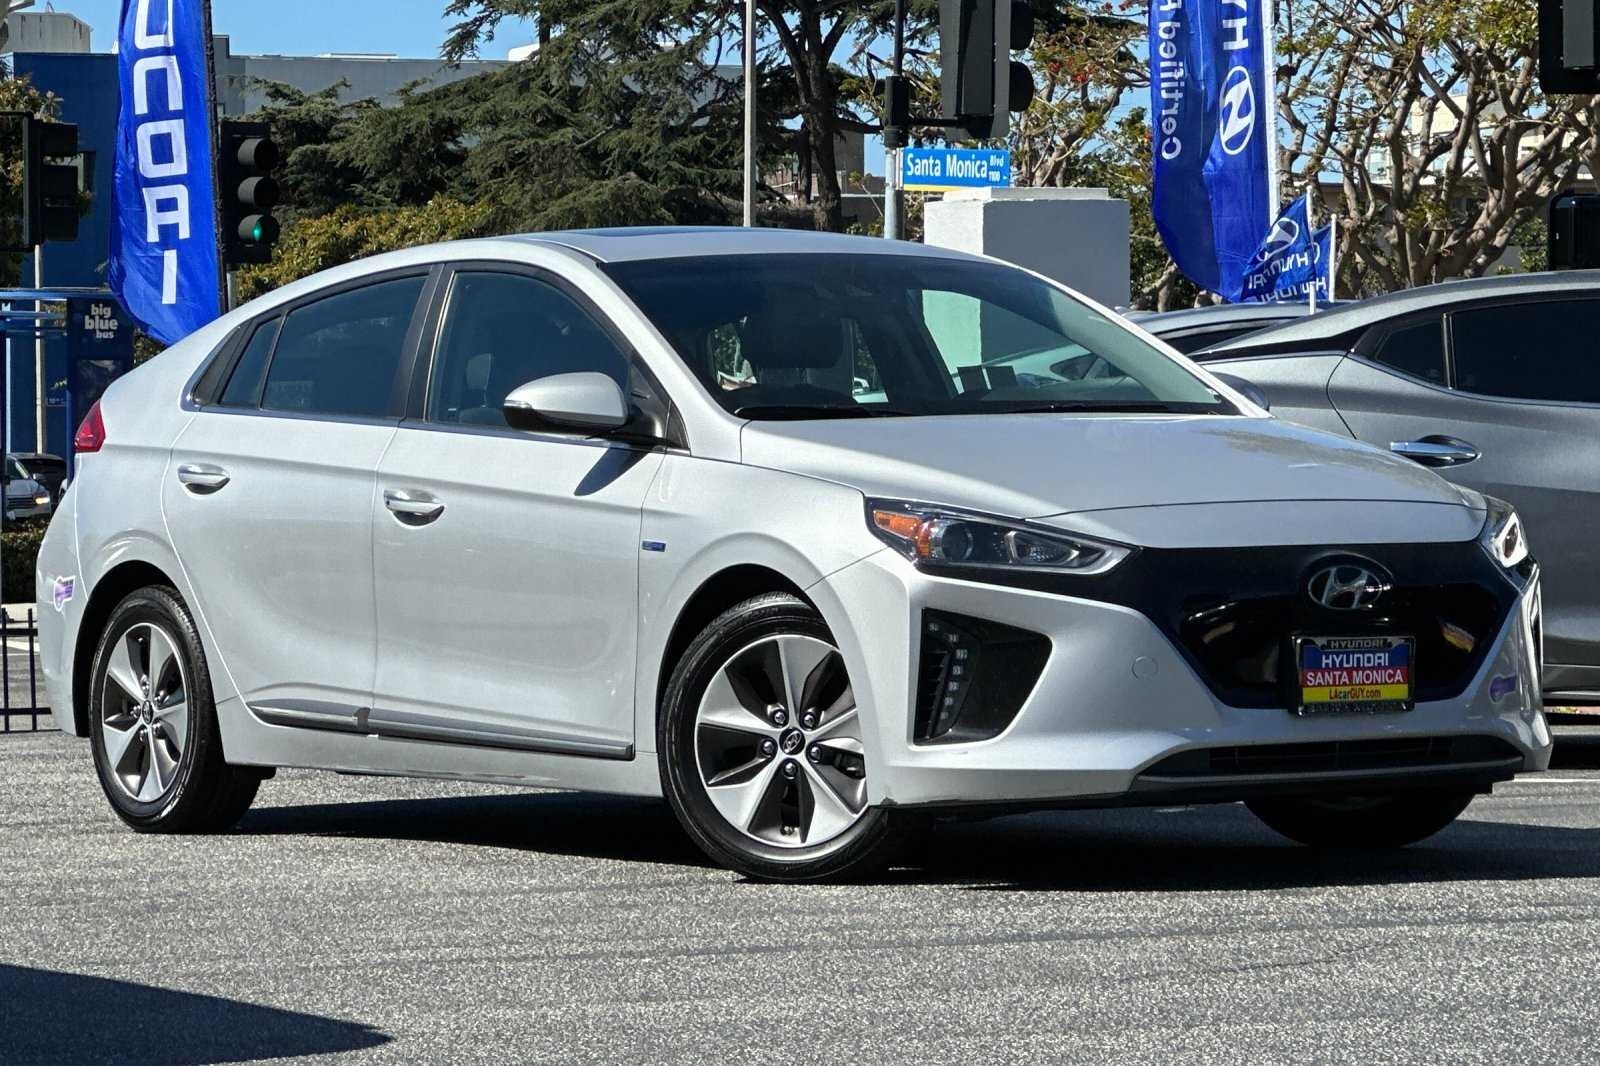 Used 2019 Hyundai Ioniq Limited with VIN KMHC05LH5KU034888 for sale in Santa Monica, CA